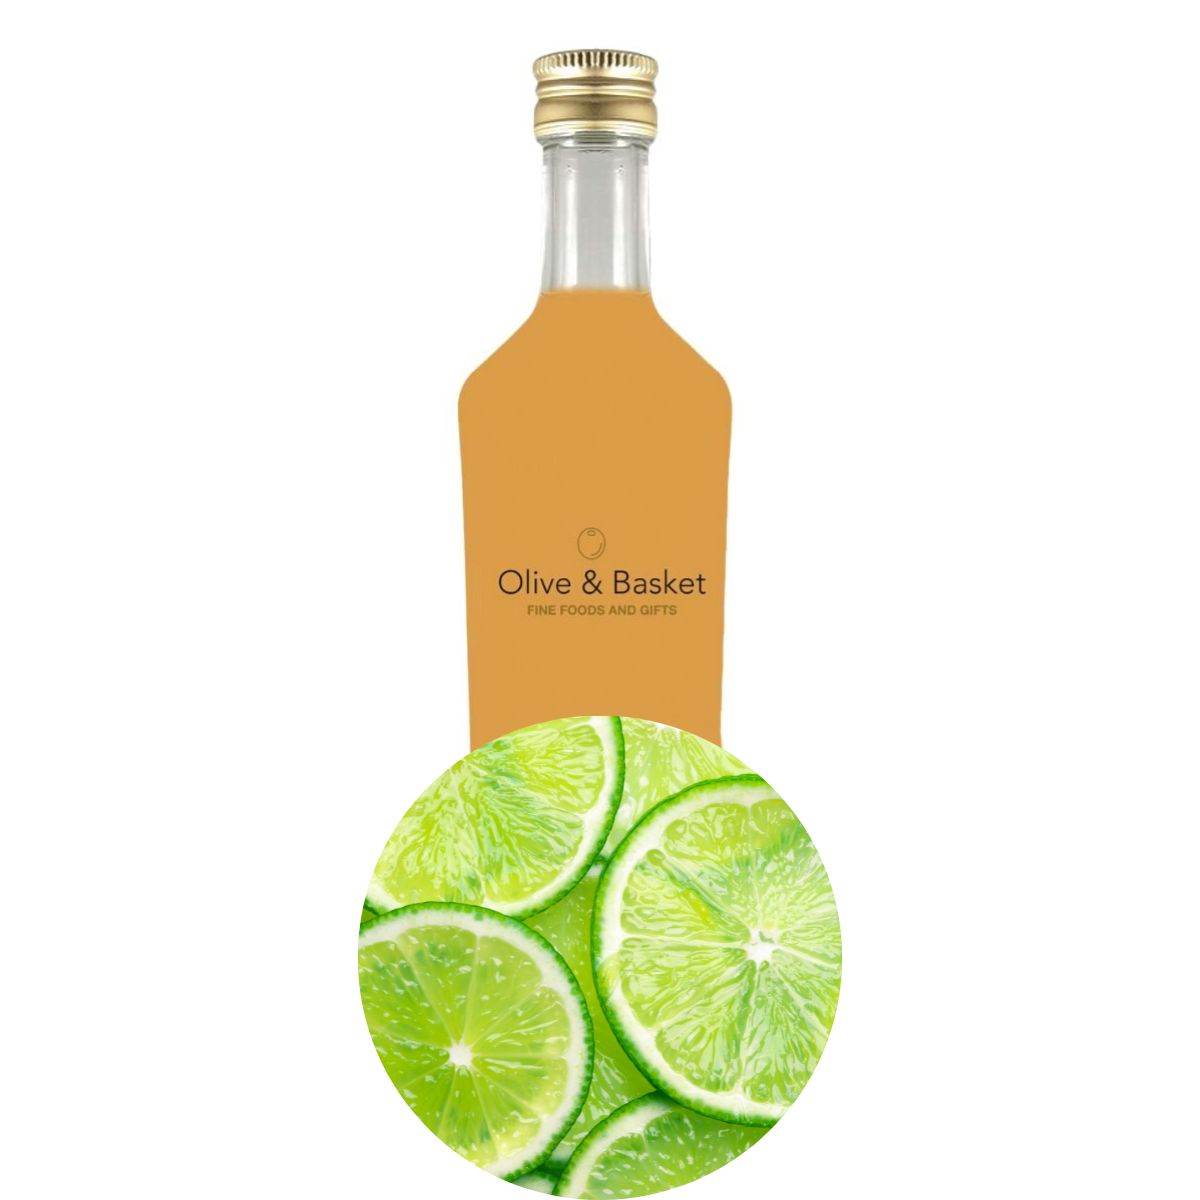 Bottle of key lime white balsamic vinegar with an icon of key lime slices.